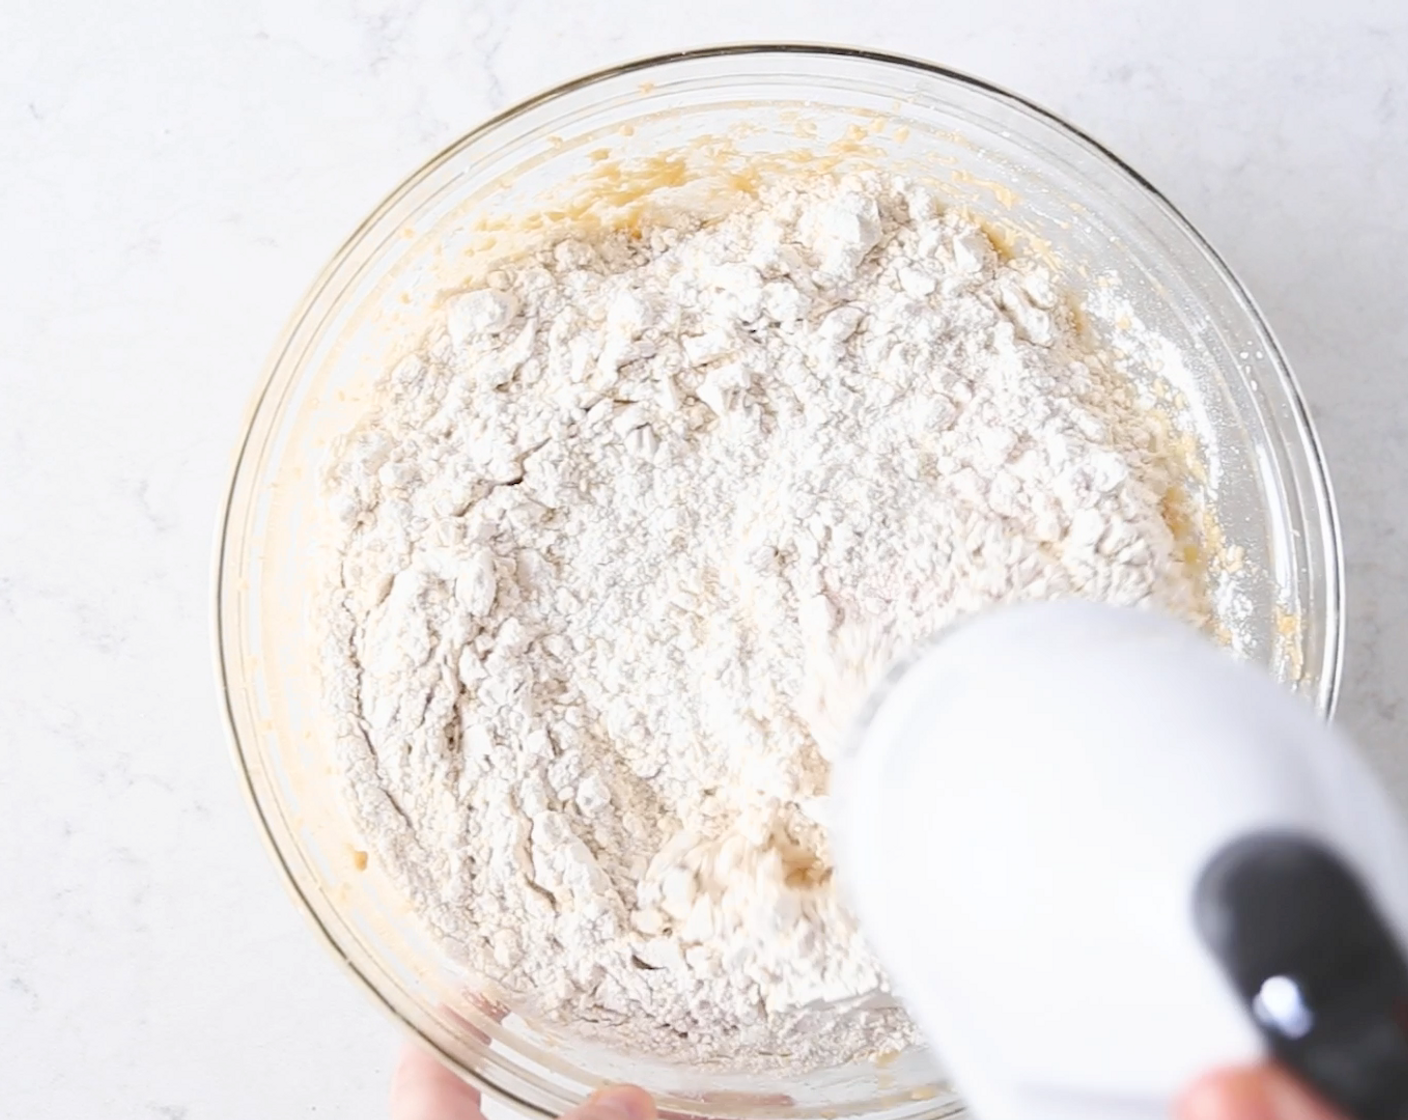 step 3 In a medium bowl, whisk together the All-Purpose Flour (4 cups), Sea Salt (1/2 Tbsp), and Baking Soda (1/2 tsp) to combine.